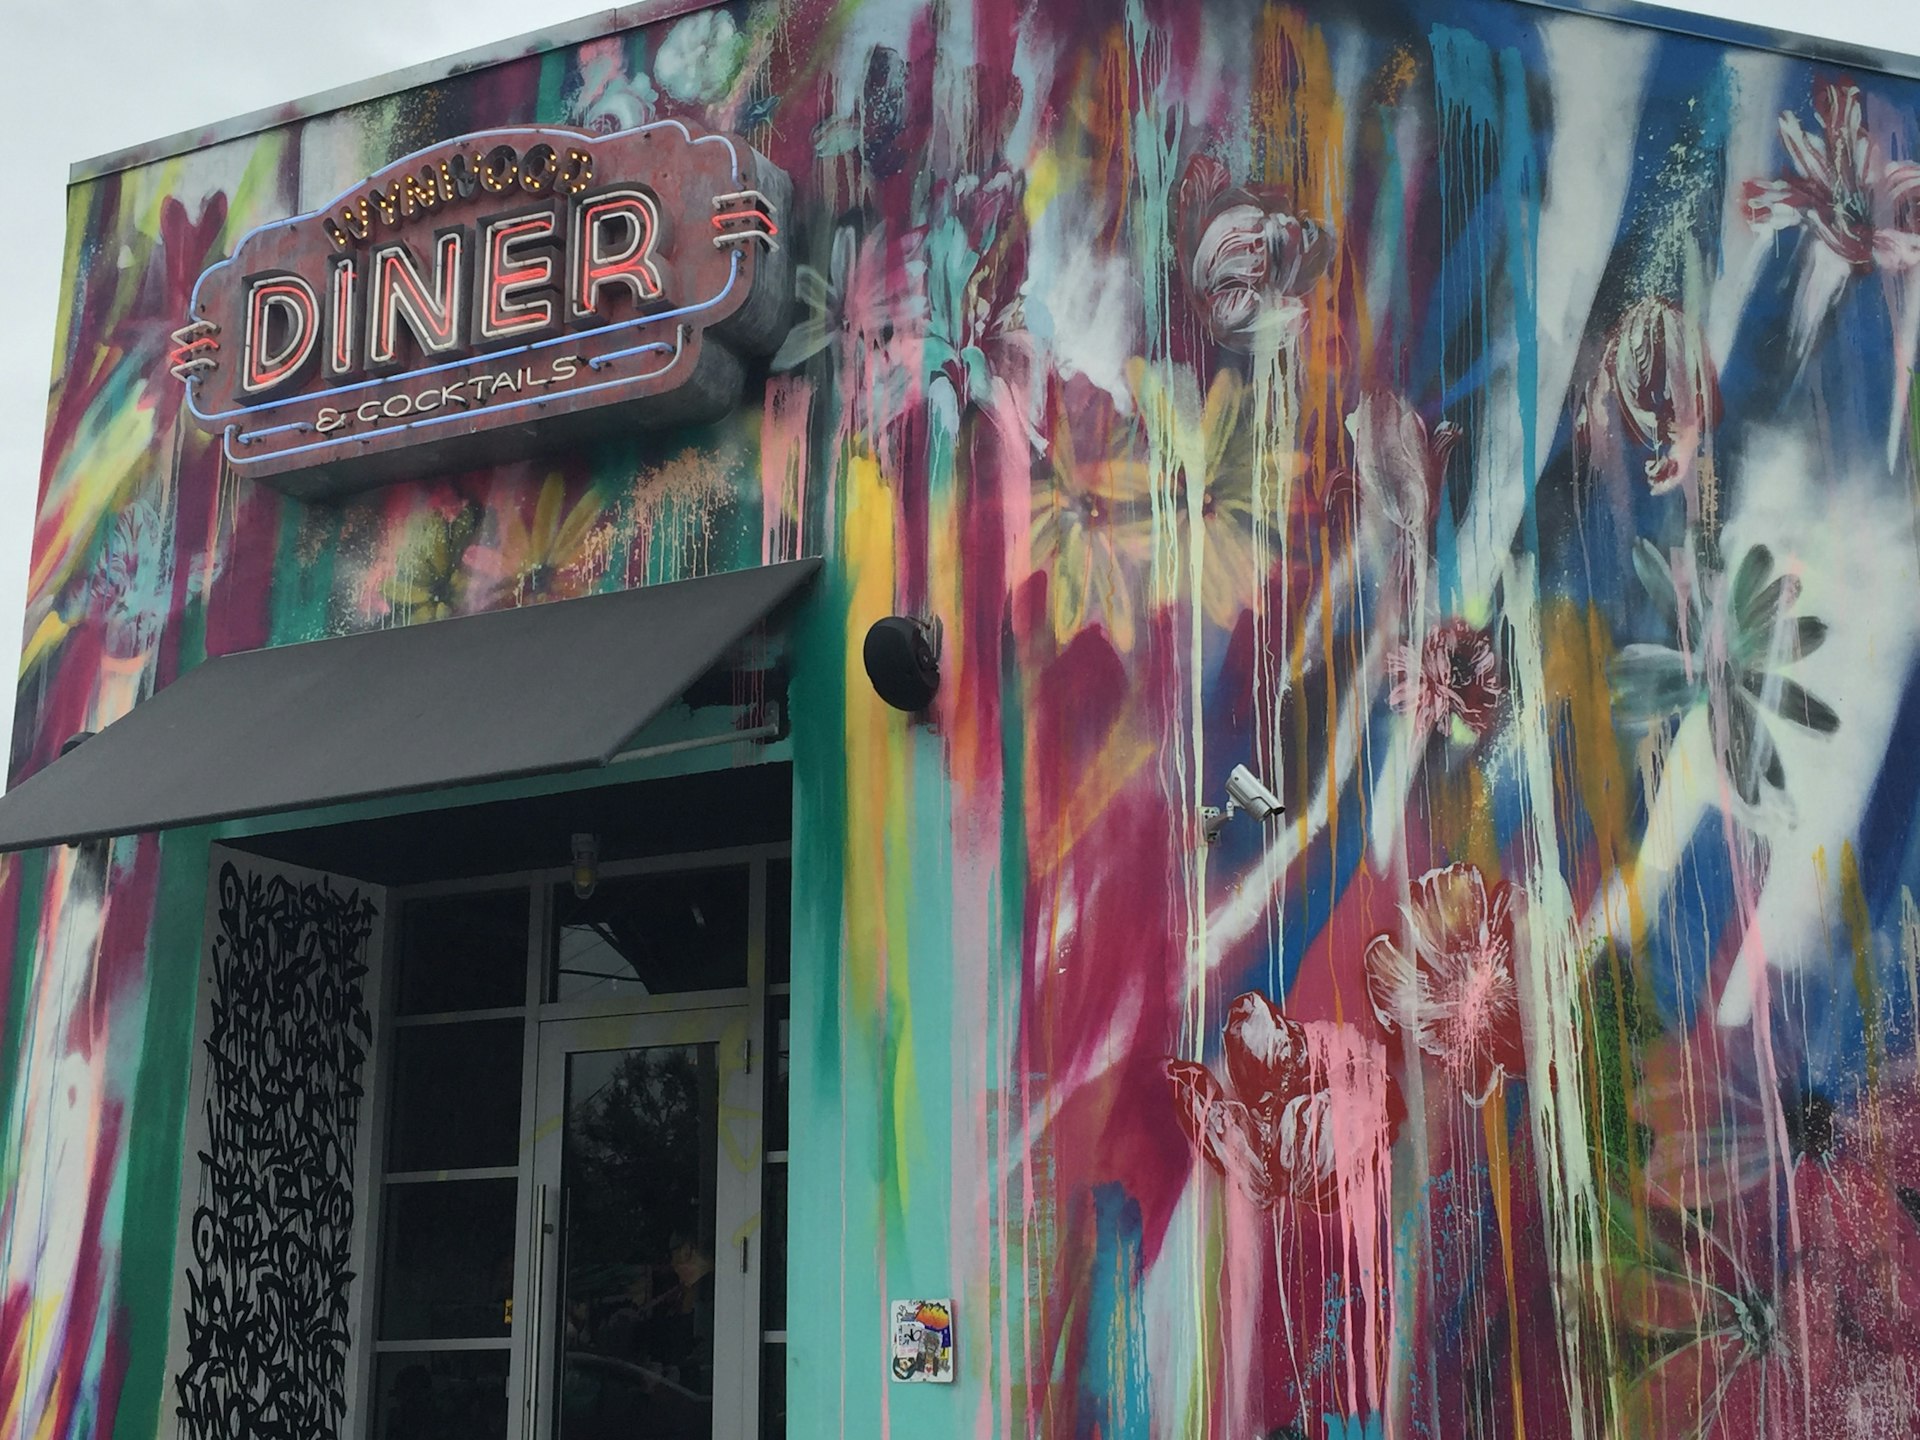 The street art has expanded to cover local restaurants and bars